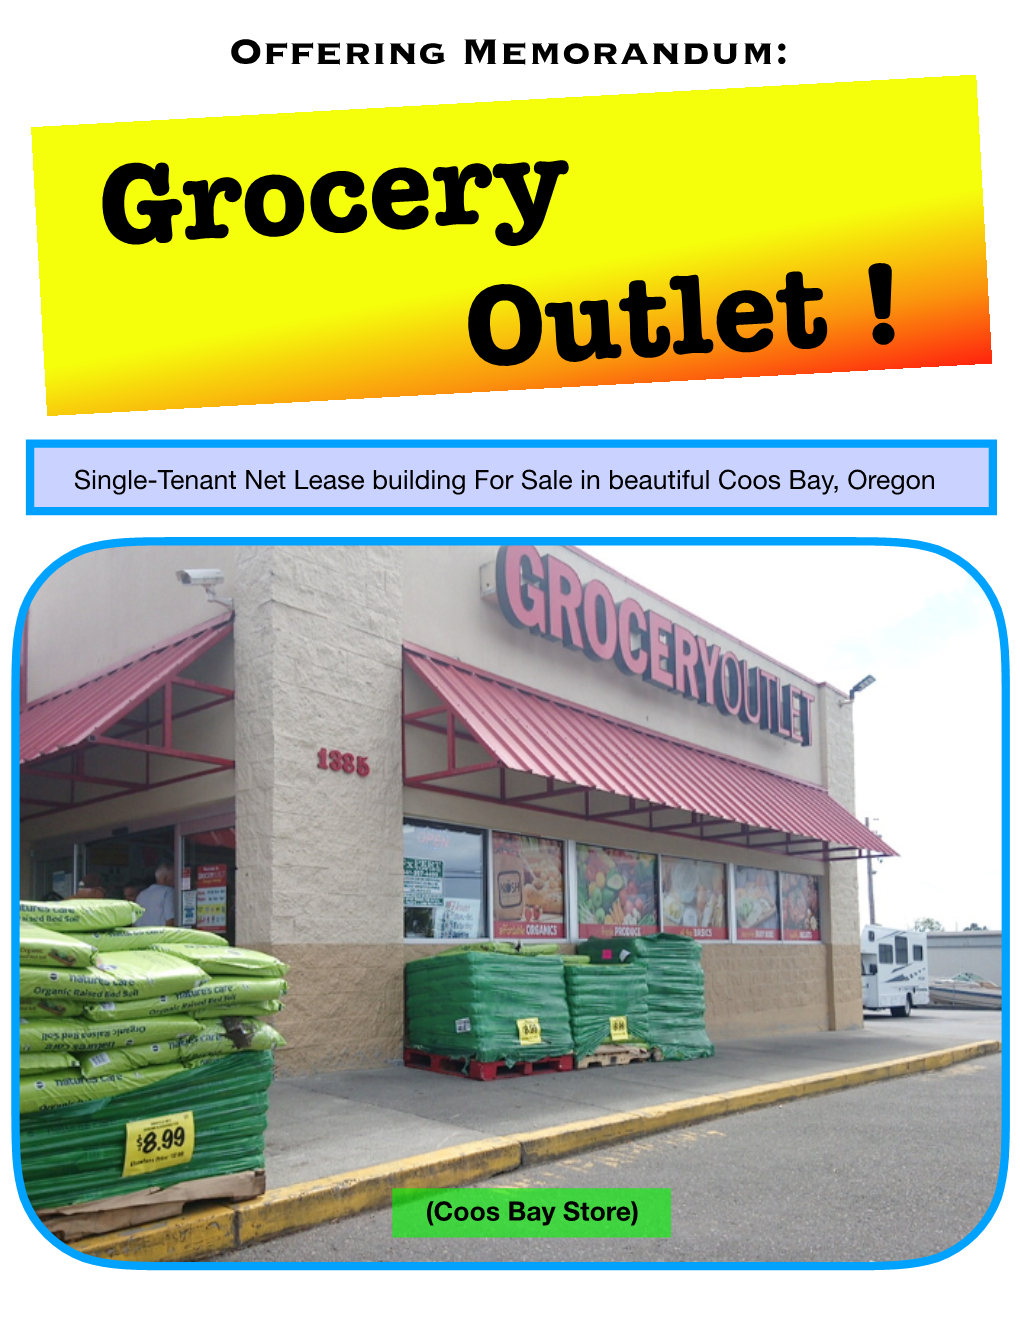 Grocery Outlet !